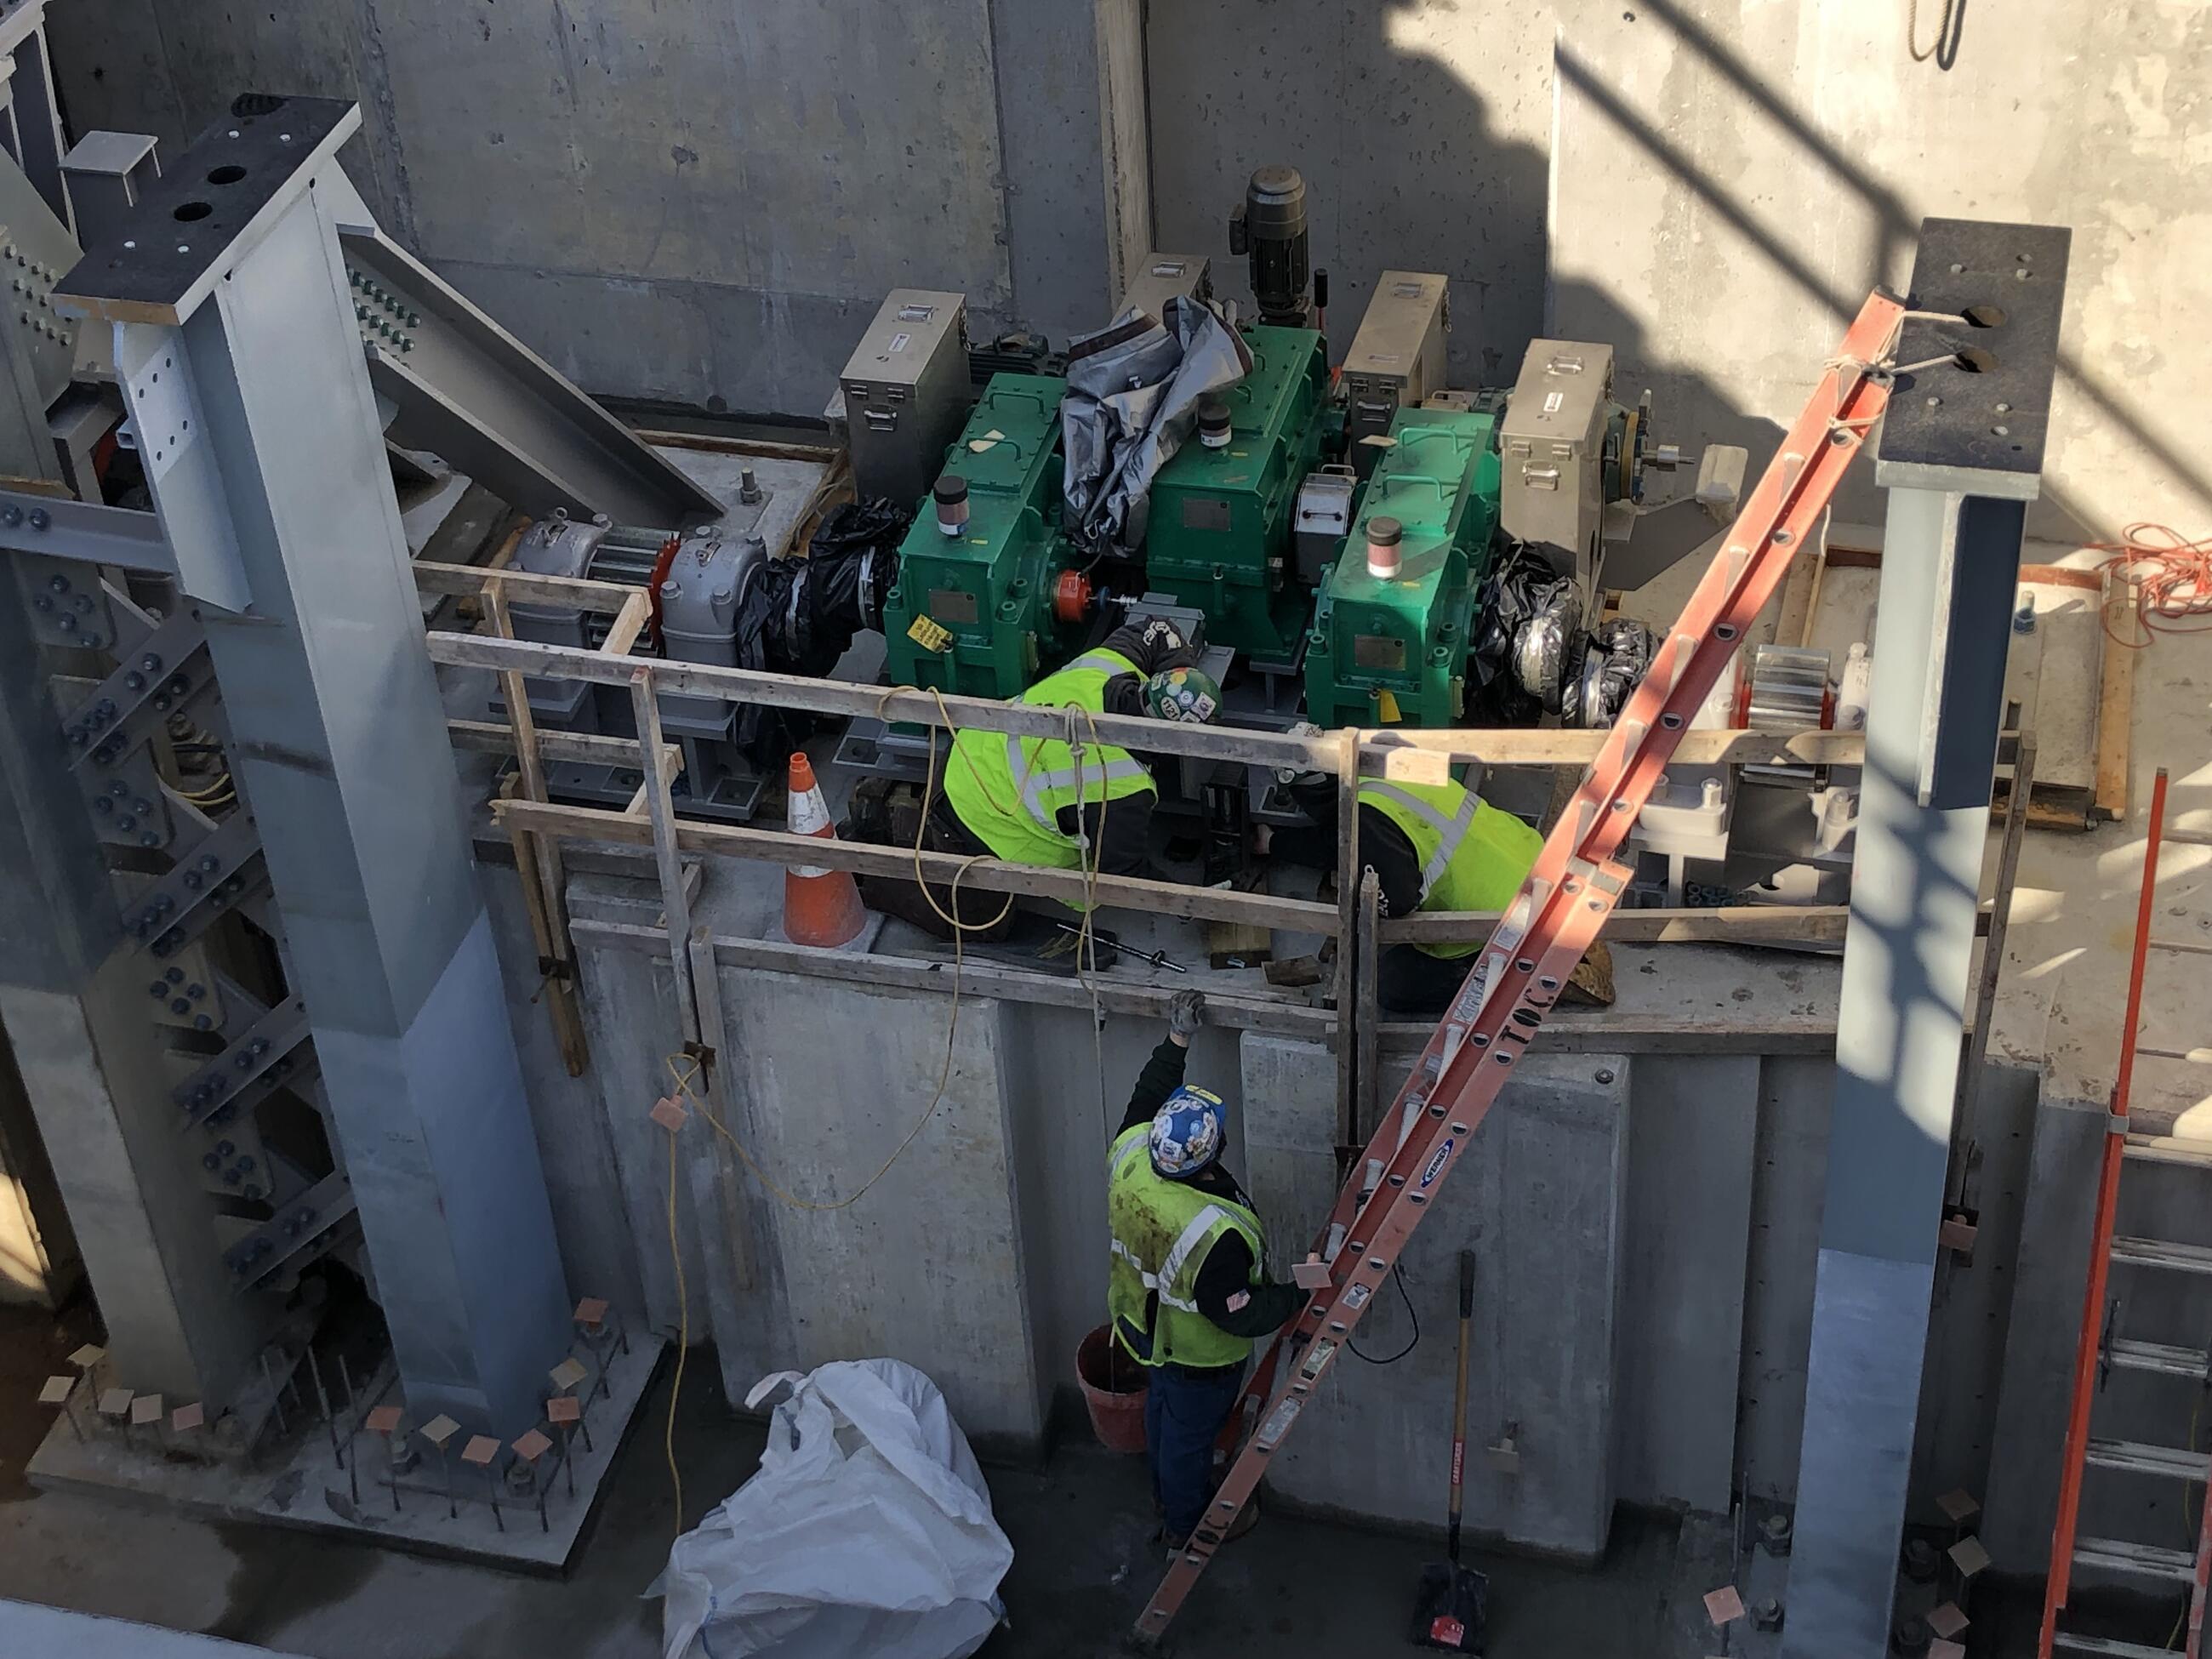 Three workers in yellow vests install machinery above a poured concrete structure, with steel posts pointing skyward on either side of them. Plywood temporary railings run along the side of the platform on which they work, and tall ladders lead from the base of the pier to the work area.